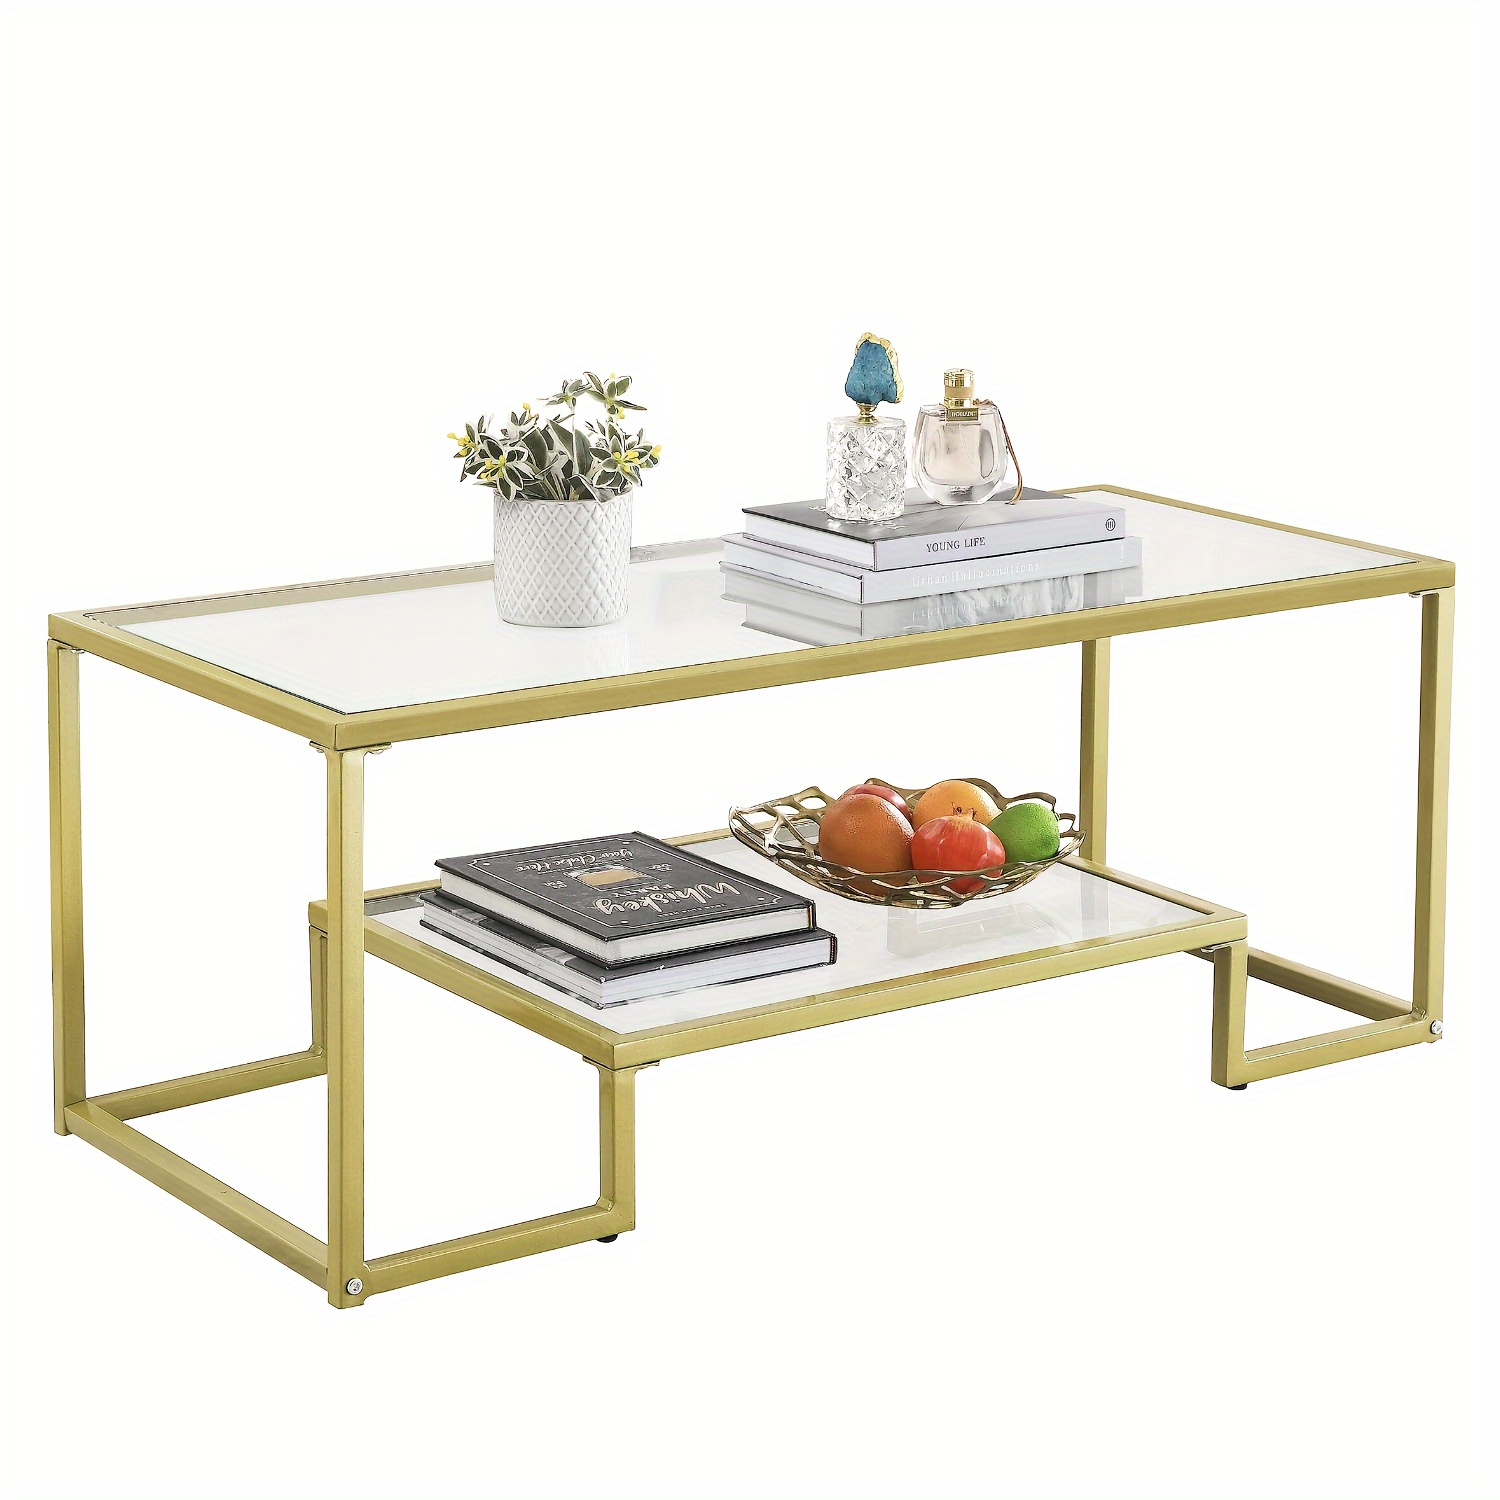 

Glass Coffee Table Modern Rectangular Coffee Table With 2-tier Storage Shelf And Sturdy Metal Frame Center Table Easy Assembly For Living Room